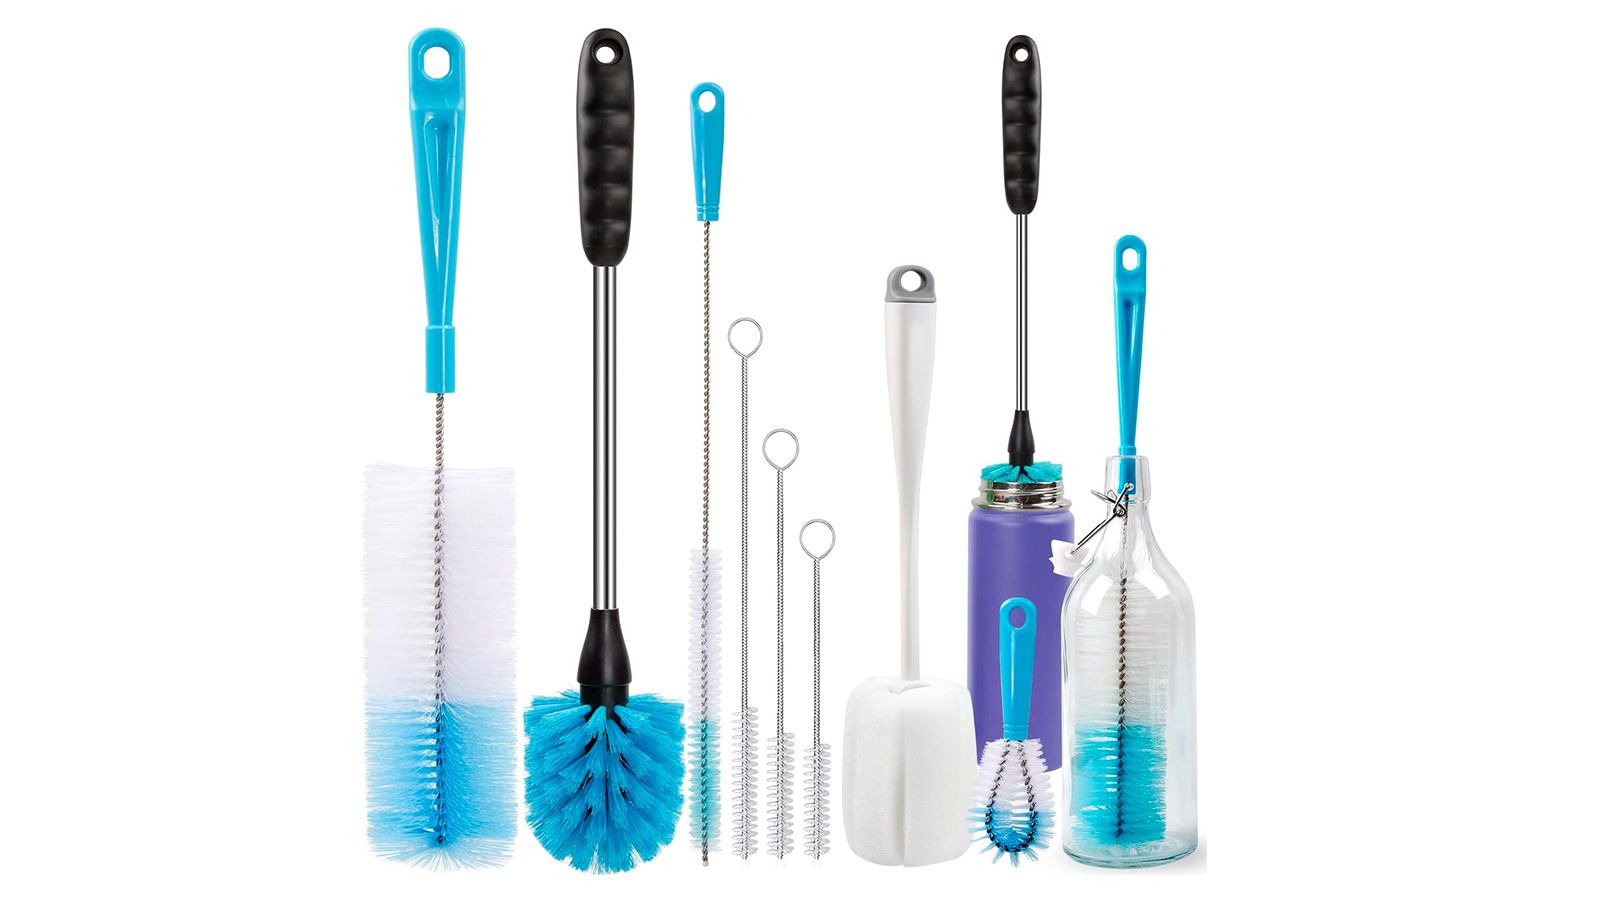 Klever Power Scrubber Brush - The Expert Kitchen & Bathroom Cleaner | Includes 8 Versatile Scrub Brushes | Cordless, Recharge